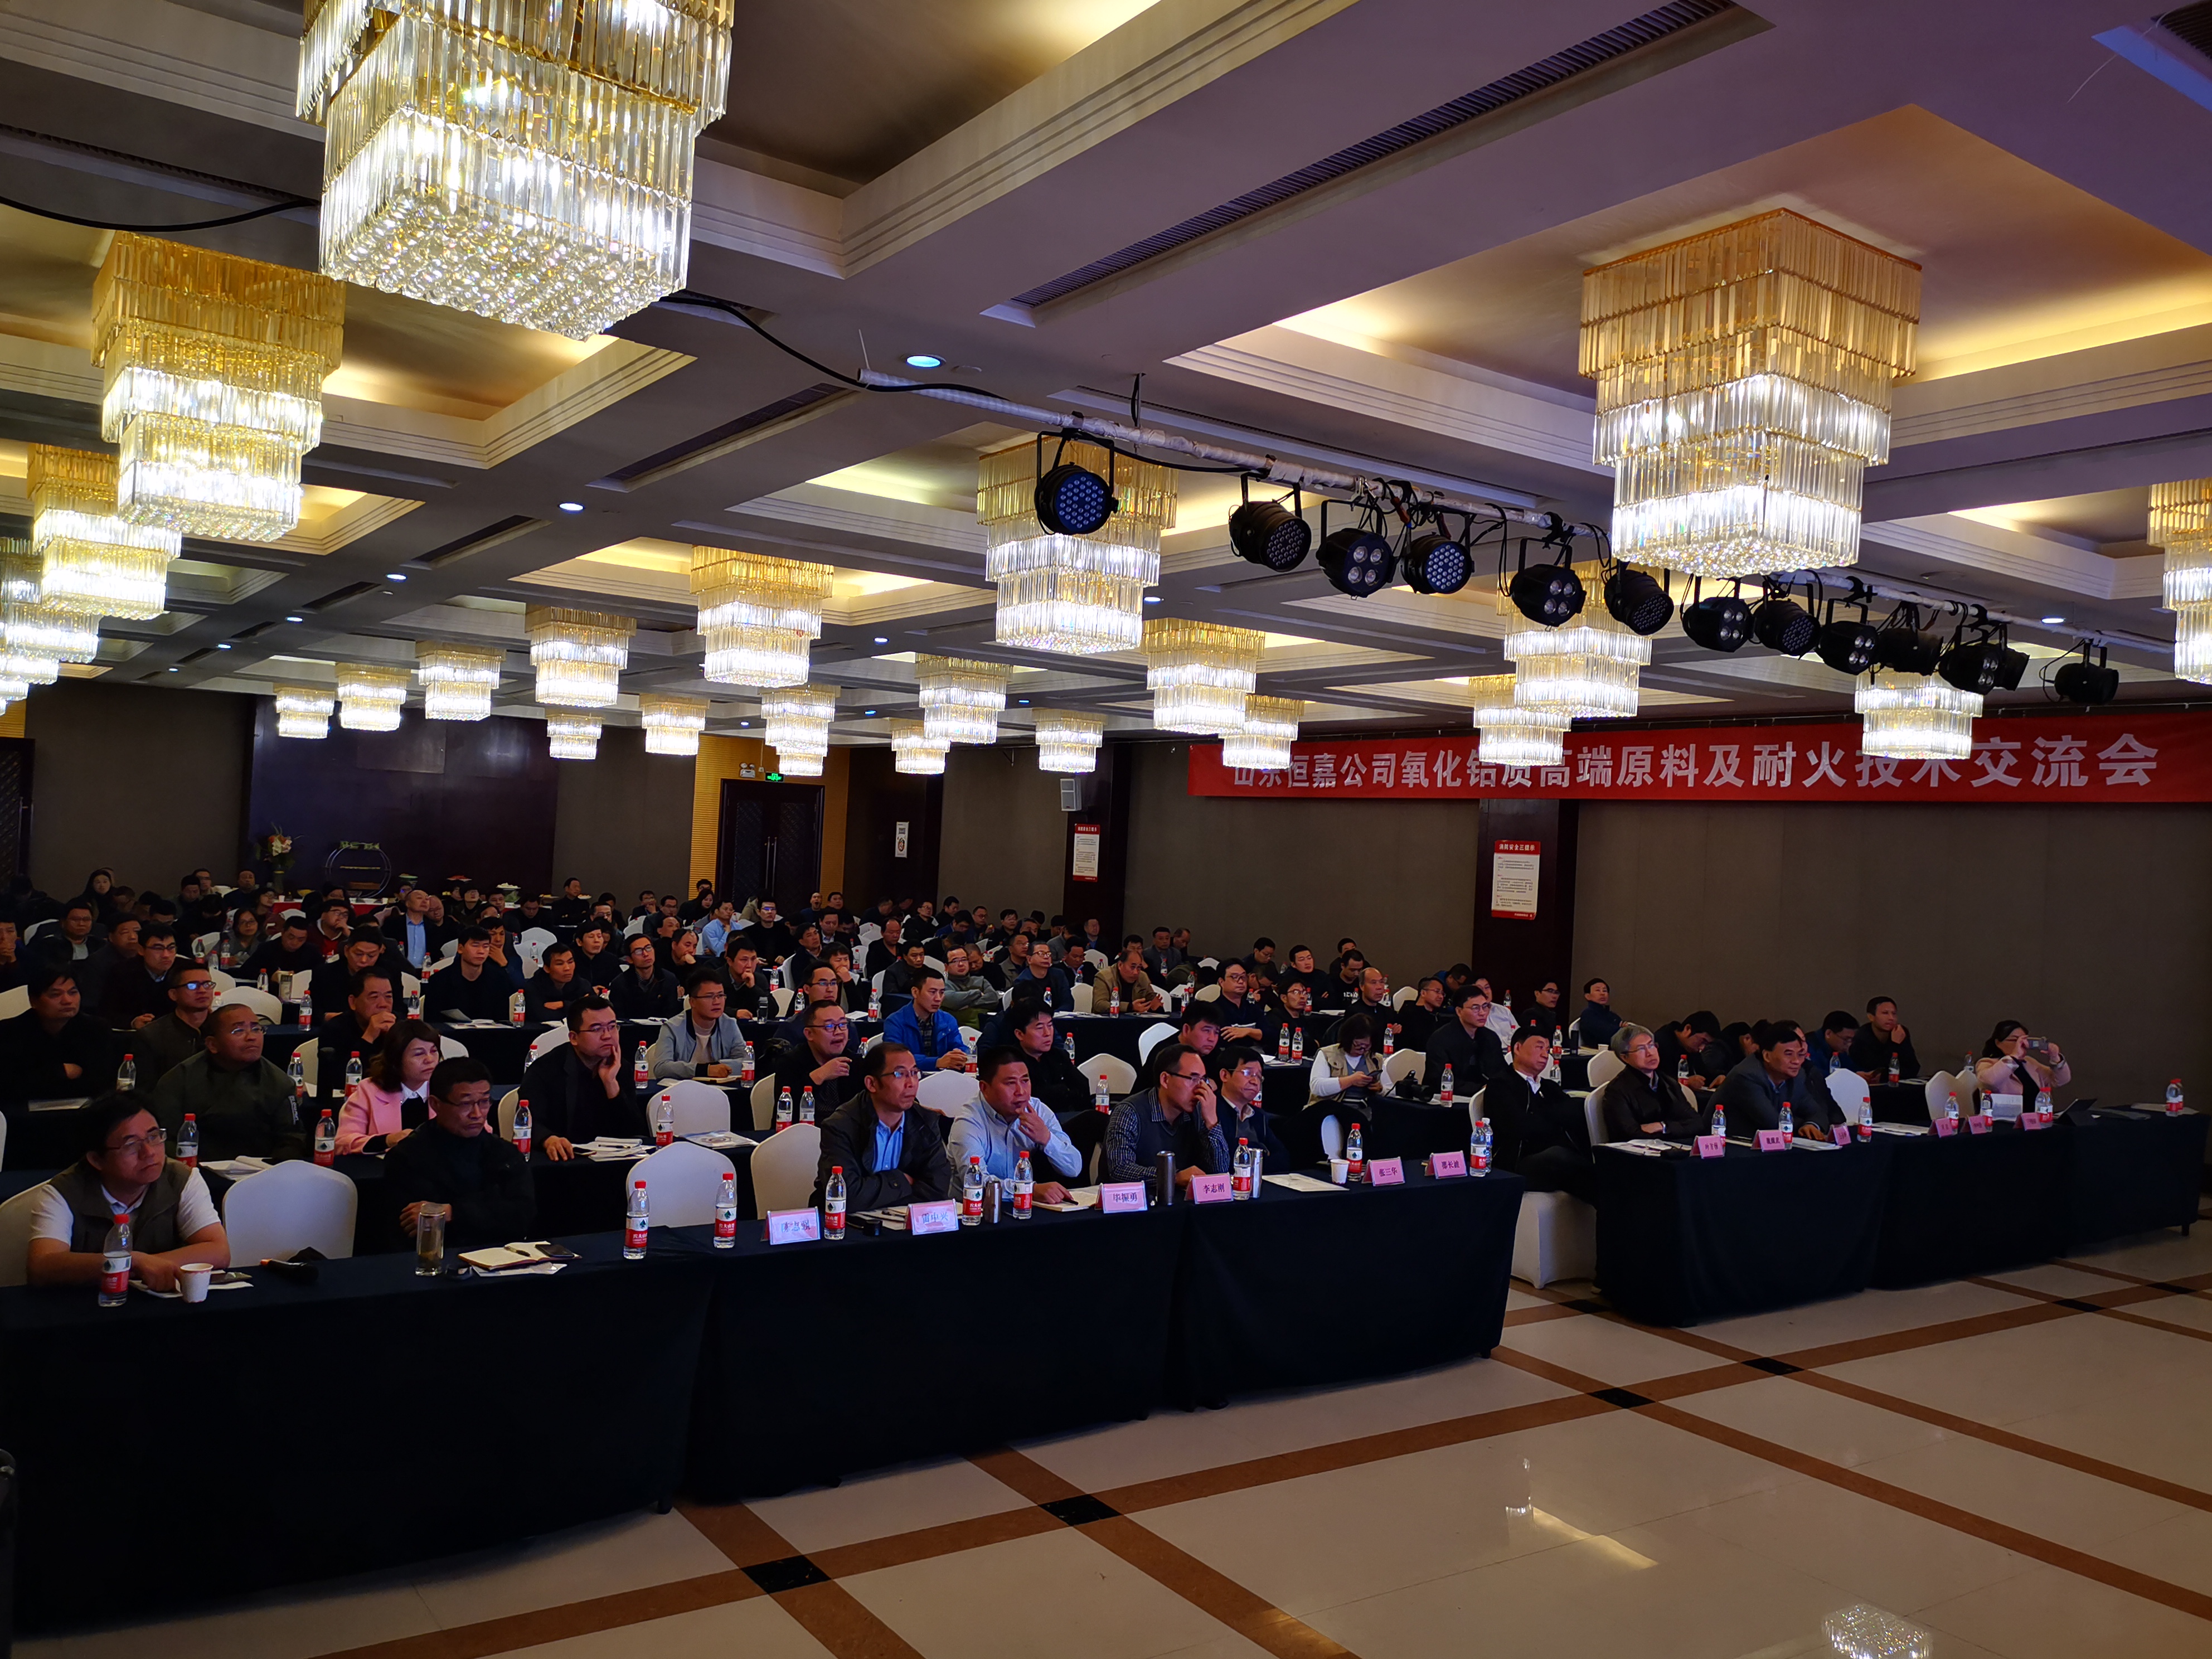 Higiant high purity alumina high-end raw materials and fire-resistant technology exchange conference